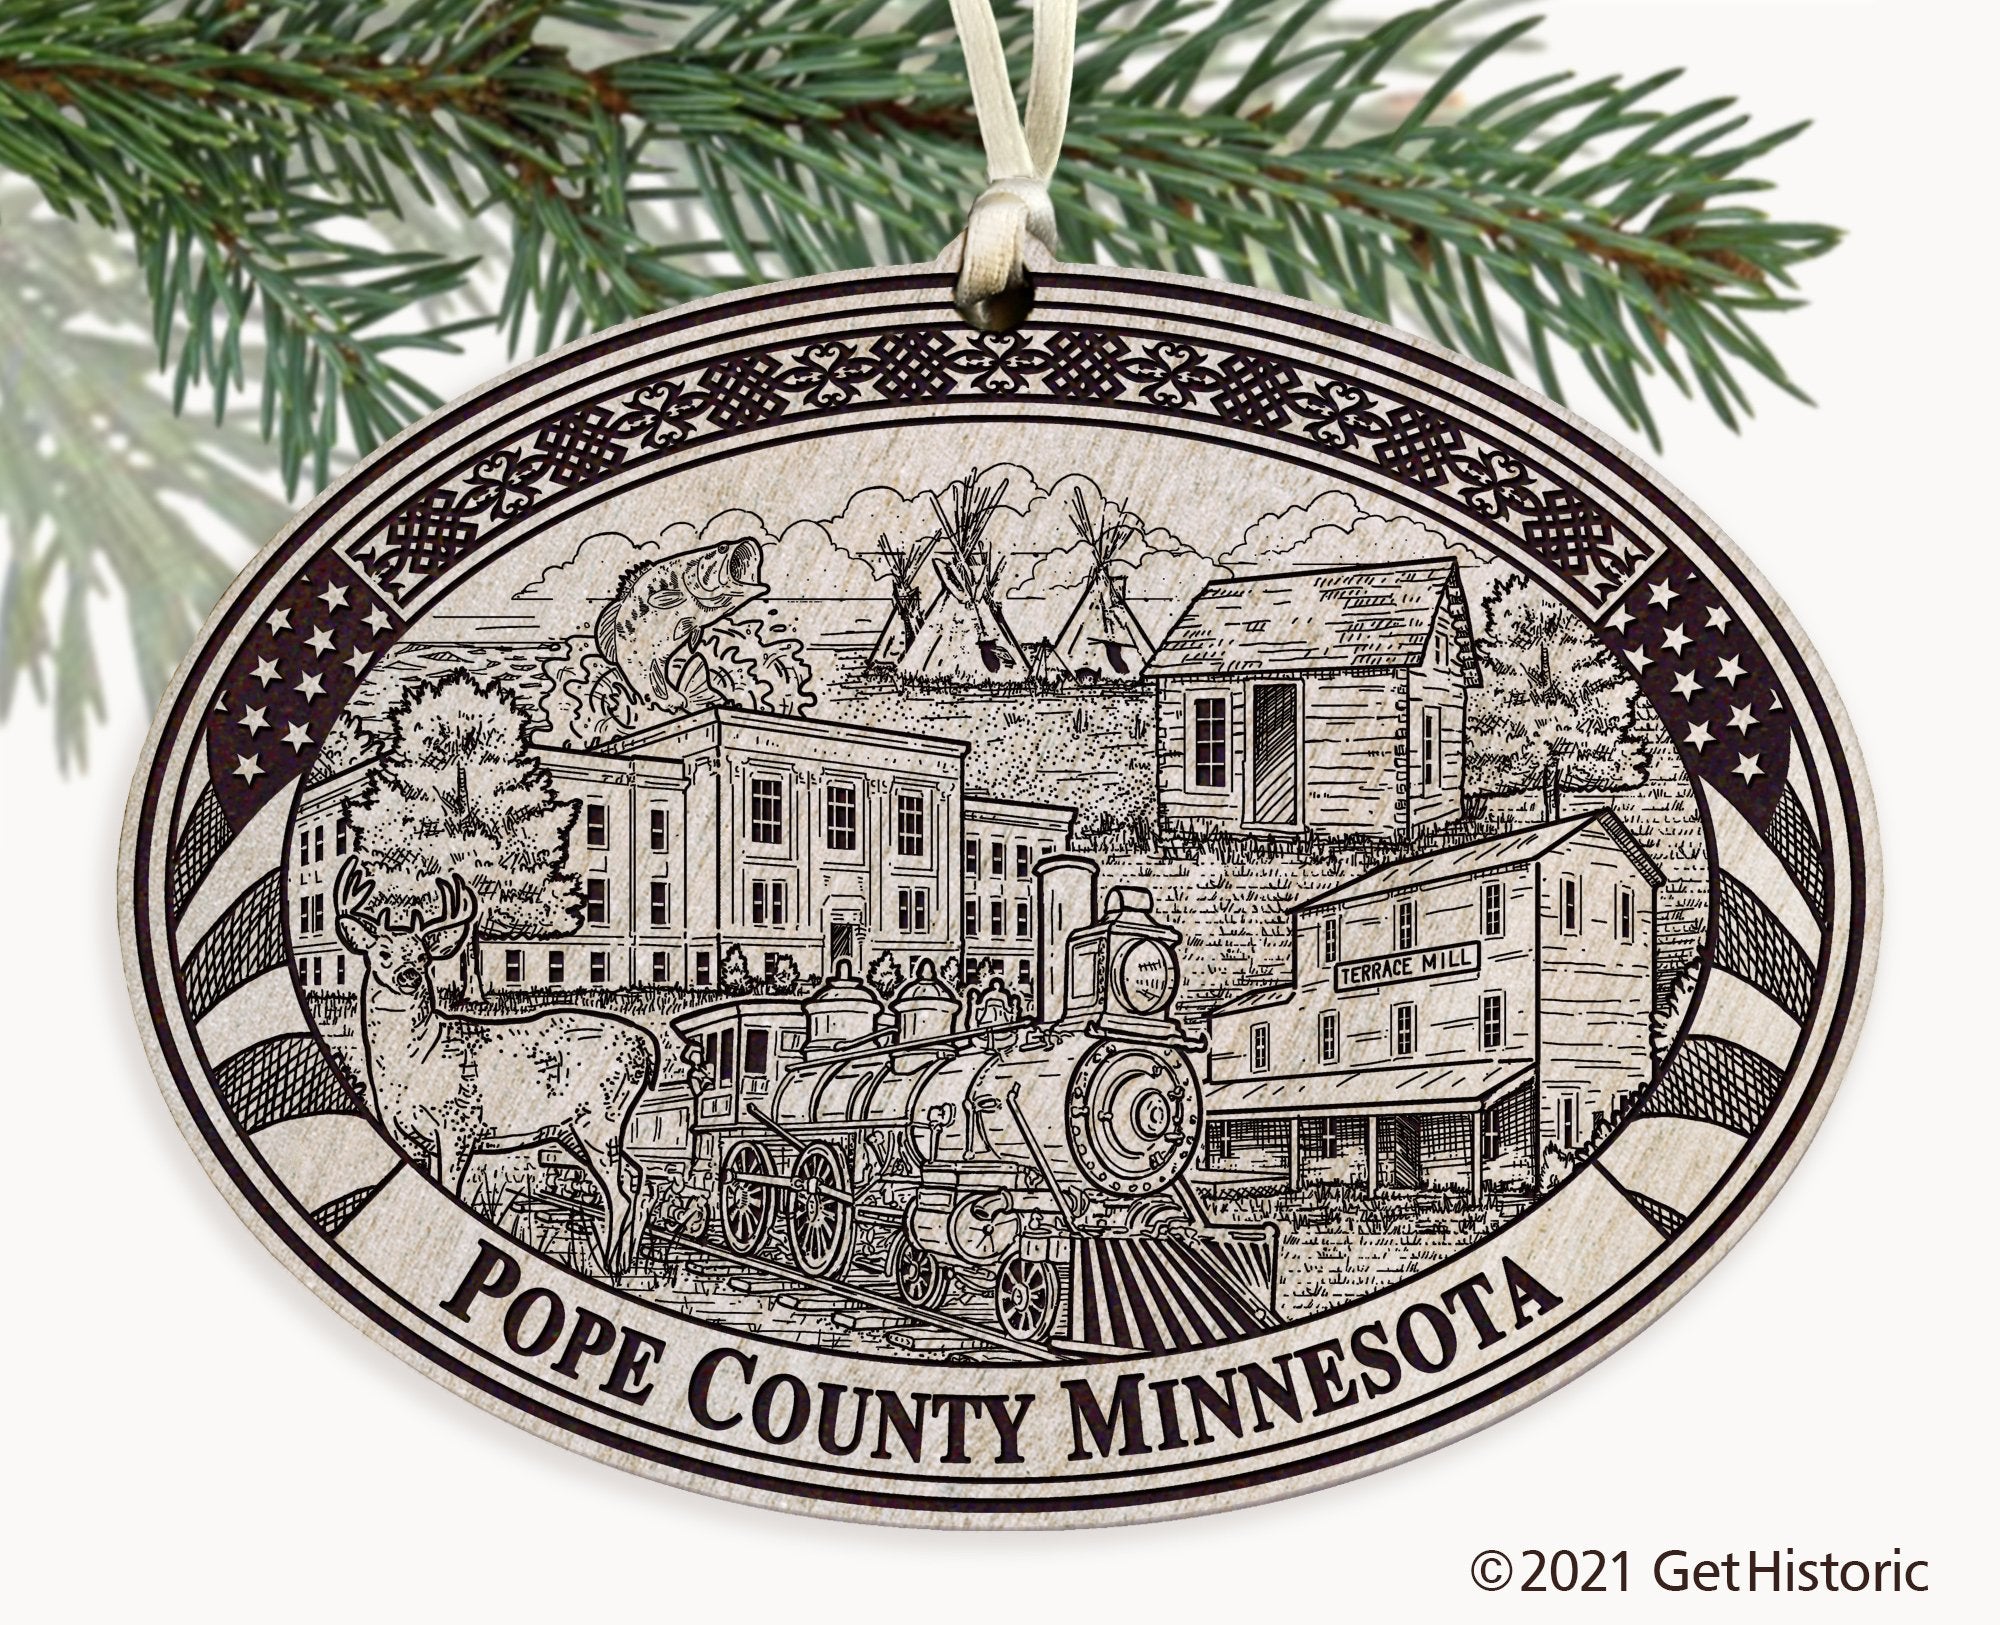 Pope County Minnesota Engraved Ornament